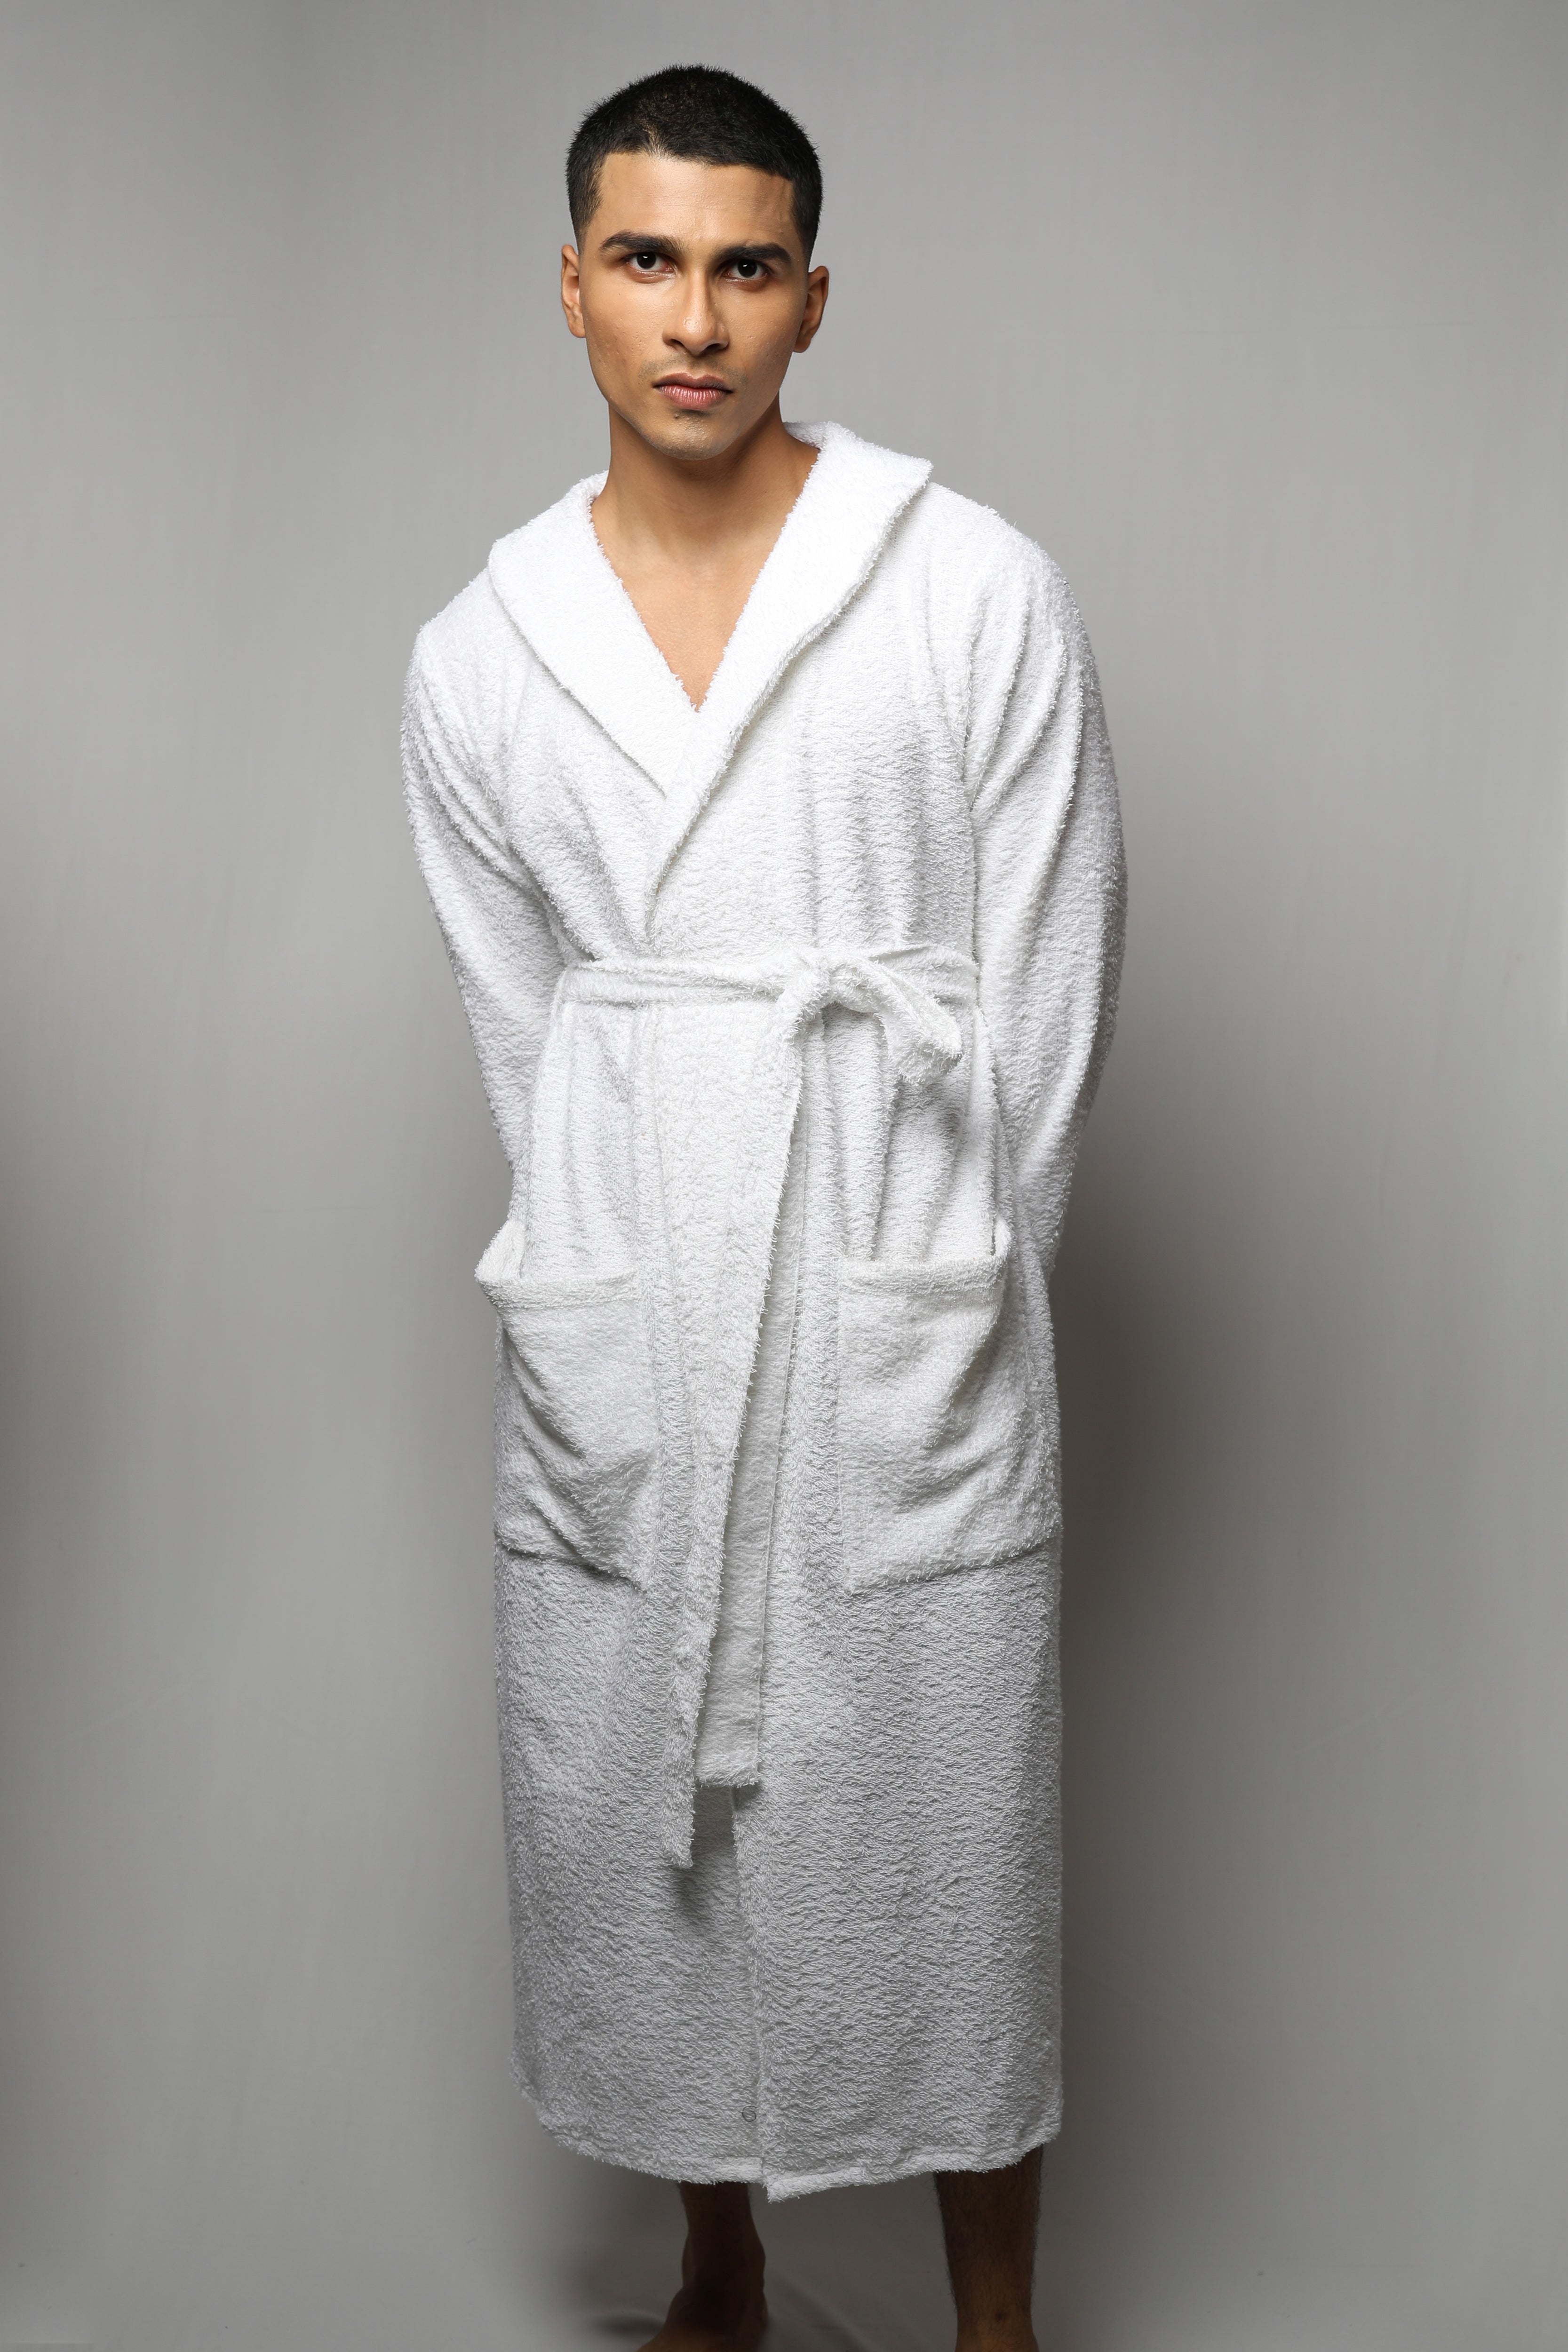 Mens Hooded Dressing Gown | Shop Now